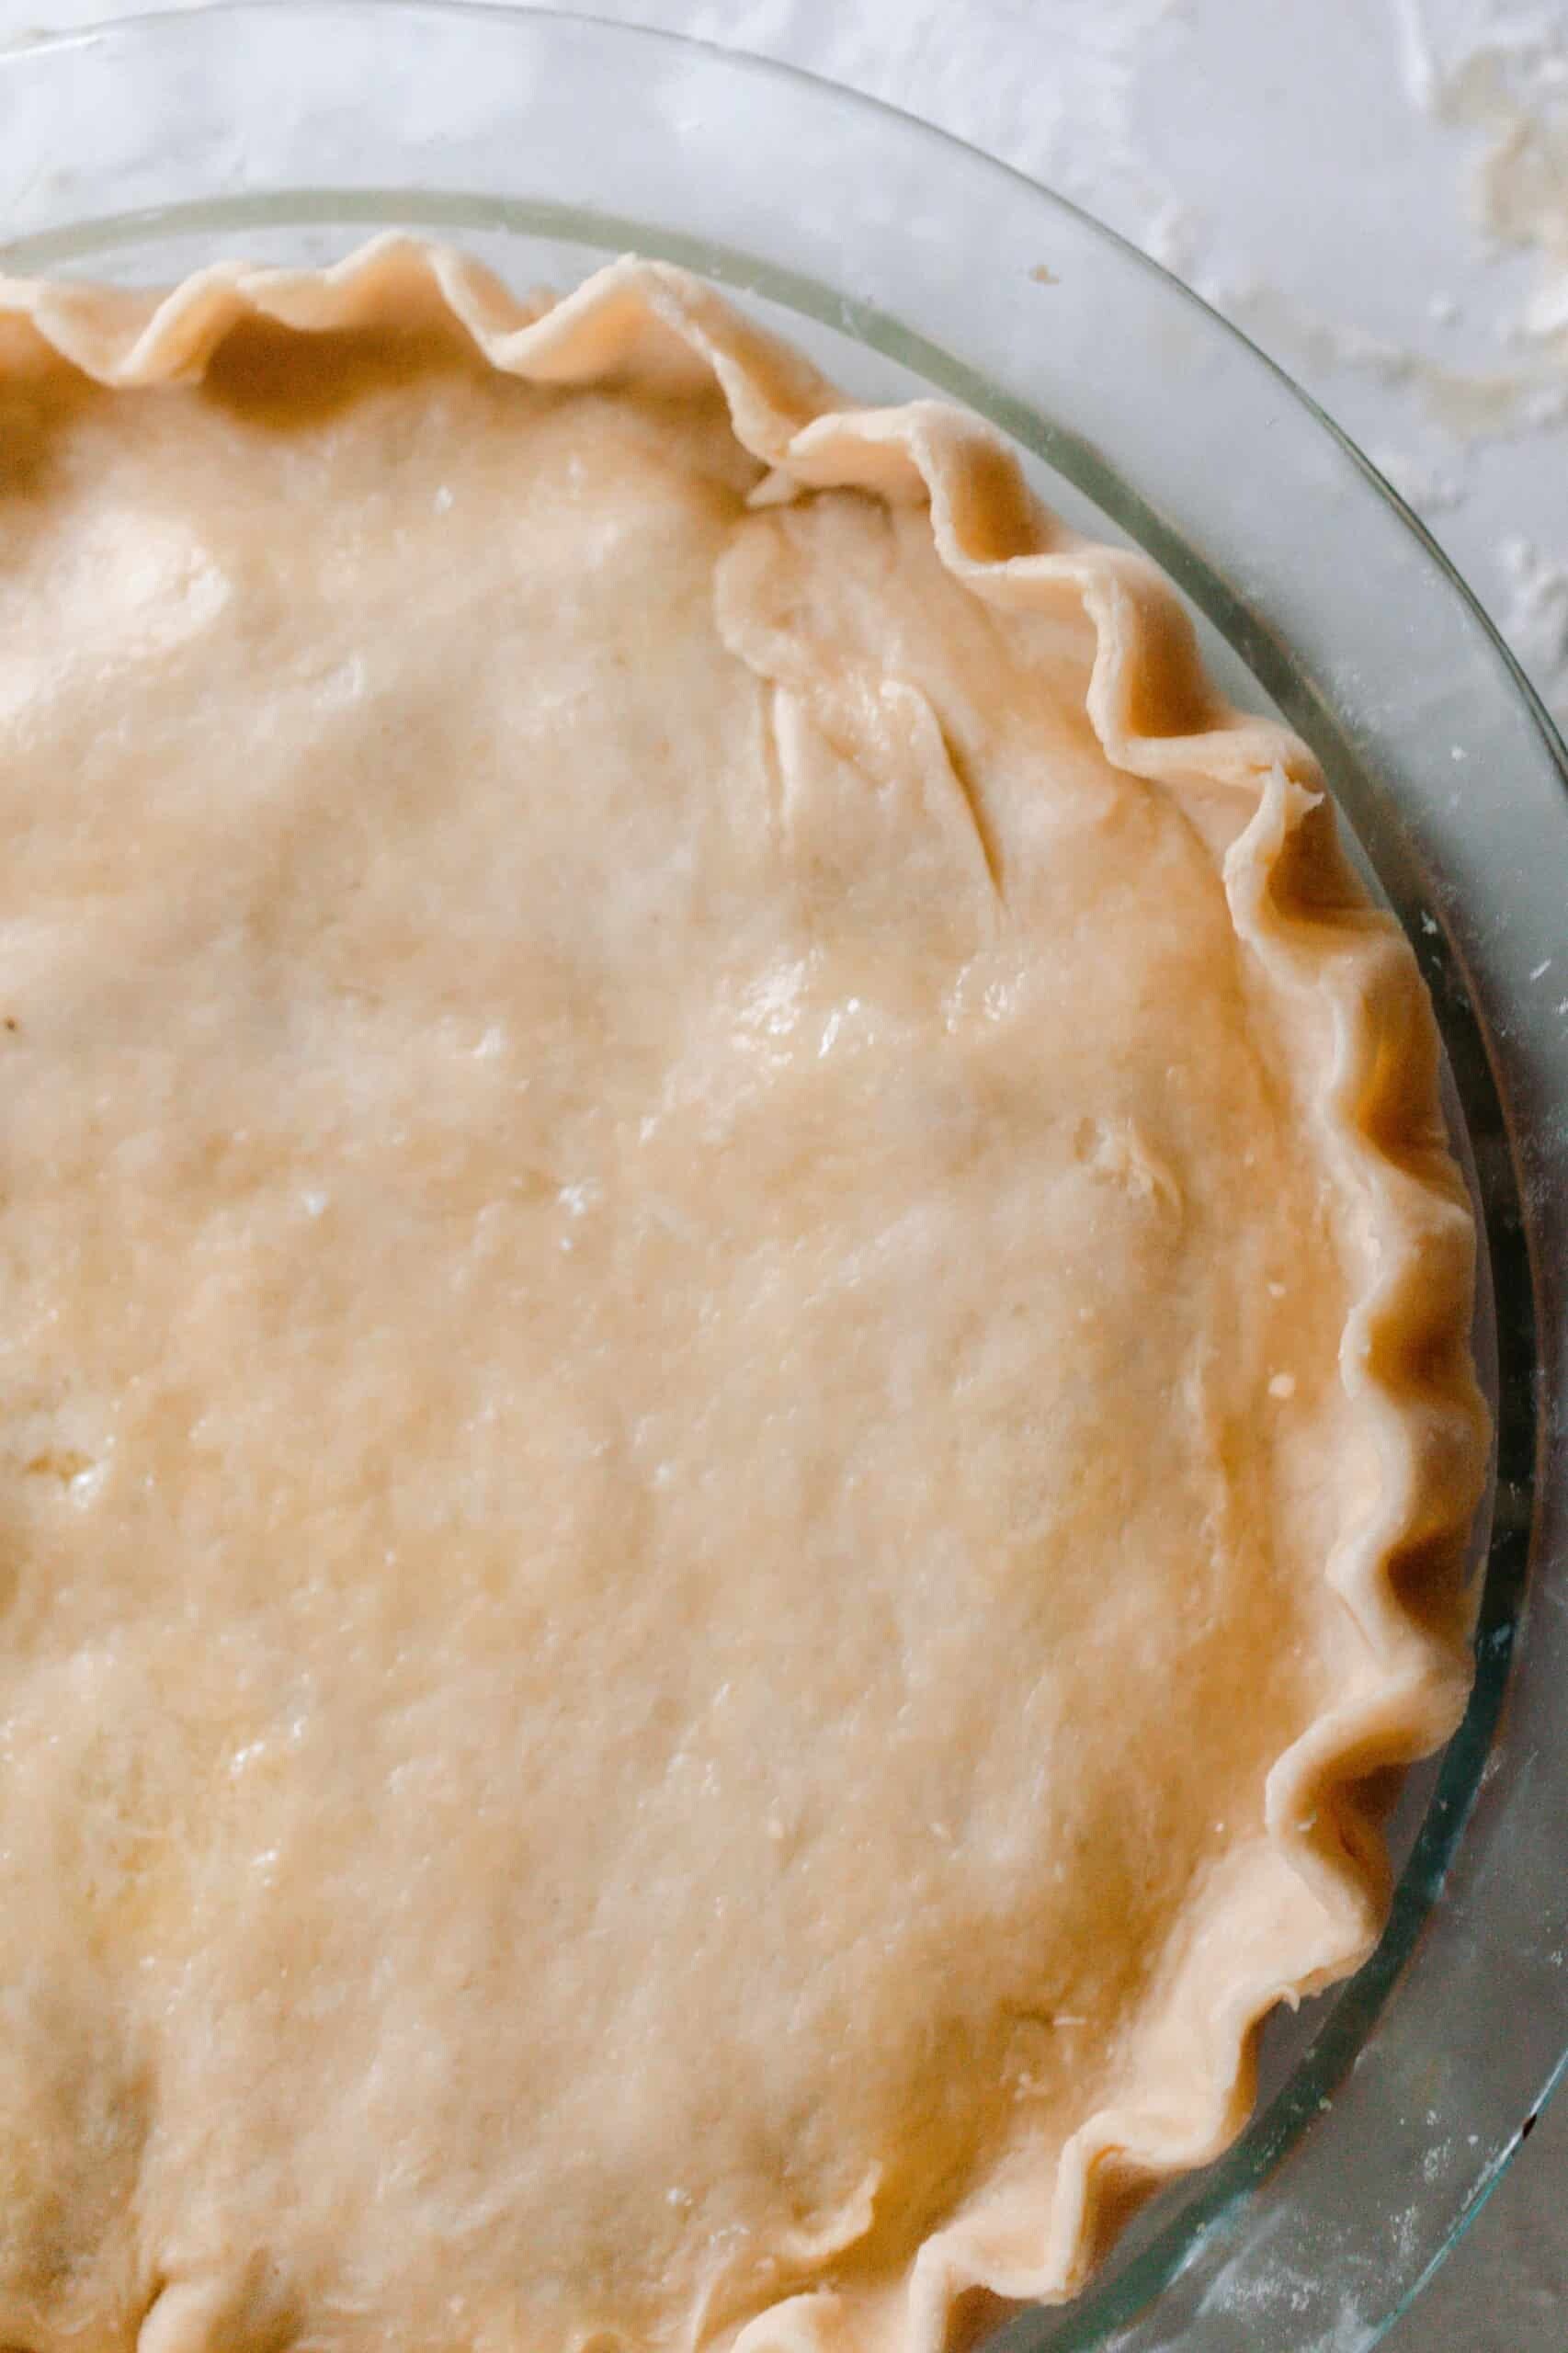 Overhead photo of einkorn pie crust used in a pie with double crust. The pie is in a glass pie dish on a white and gray quartz counter